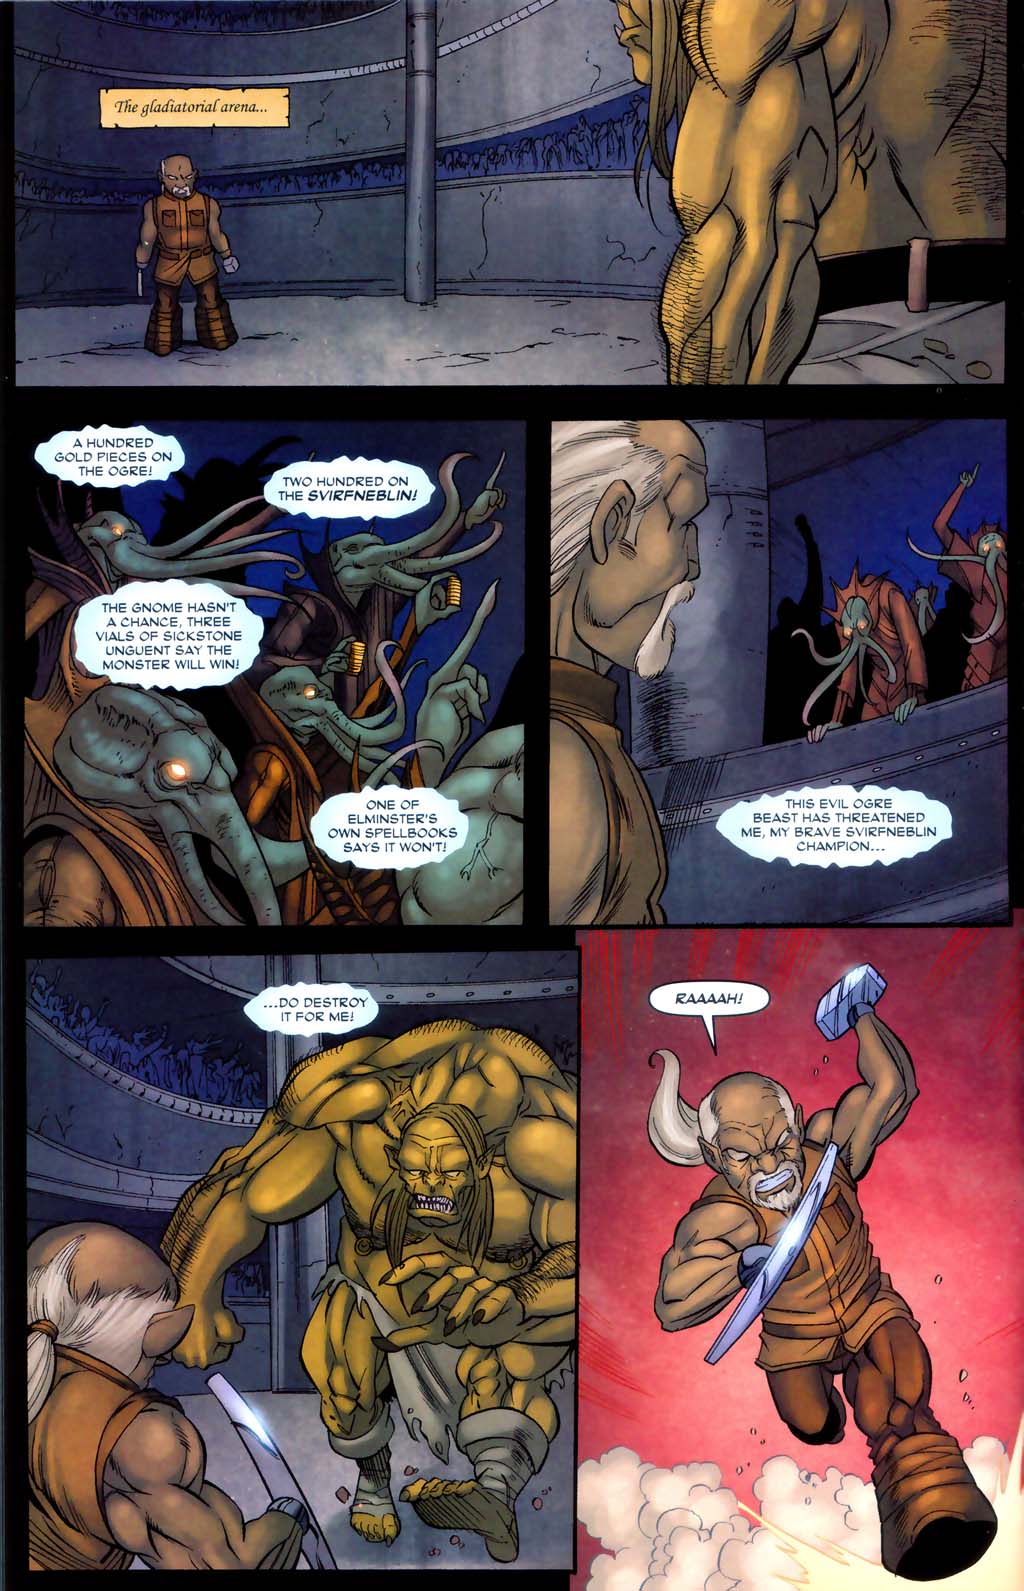 Forgotten Realms: Exile #3 - Issue #3, Part 1